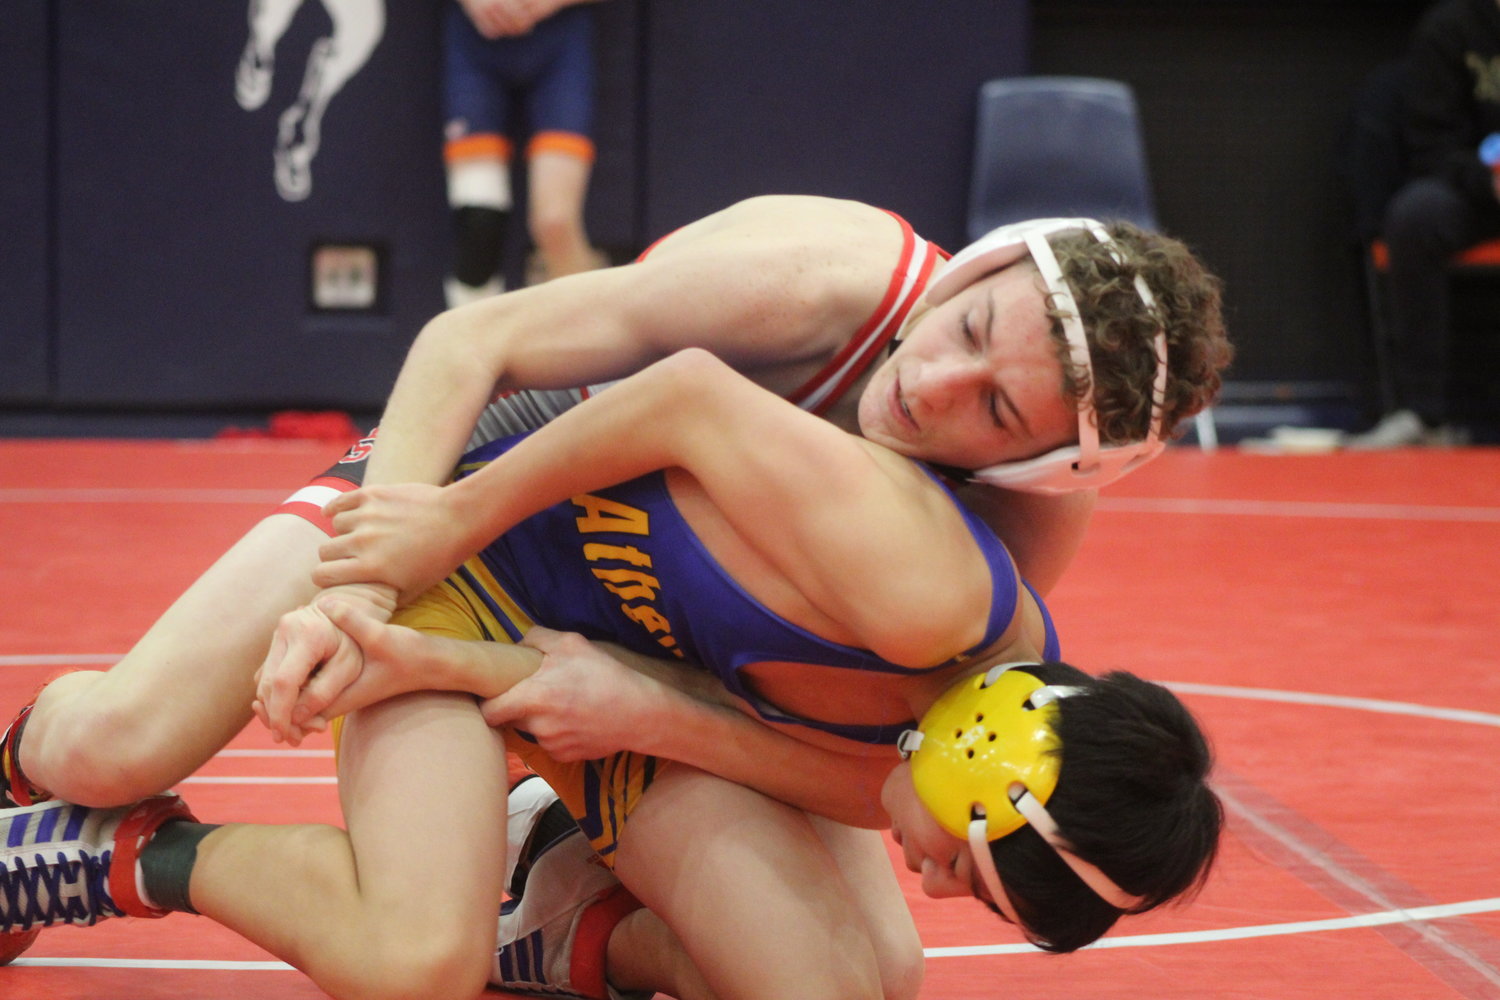 Southmont's Brier Riggle and Crawfordsville's Taiga Koyanago both had successful days at 106 with Riggle taking 2nd and Koyanagi 4th